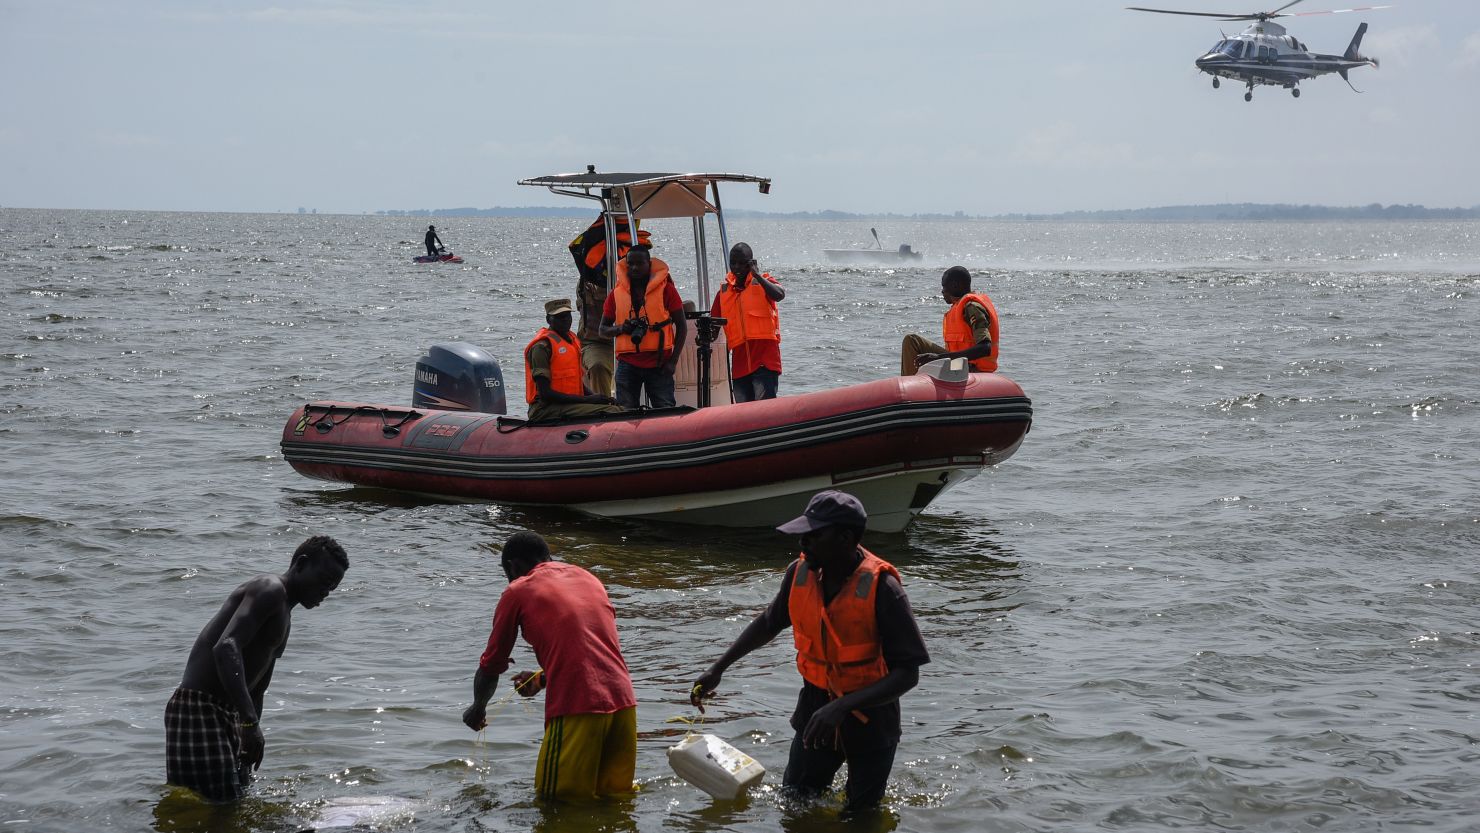 Rescuers search for victims at the site of a capsized cruise boat on Lake Victoria.